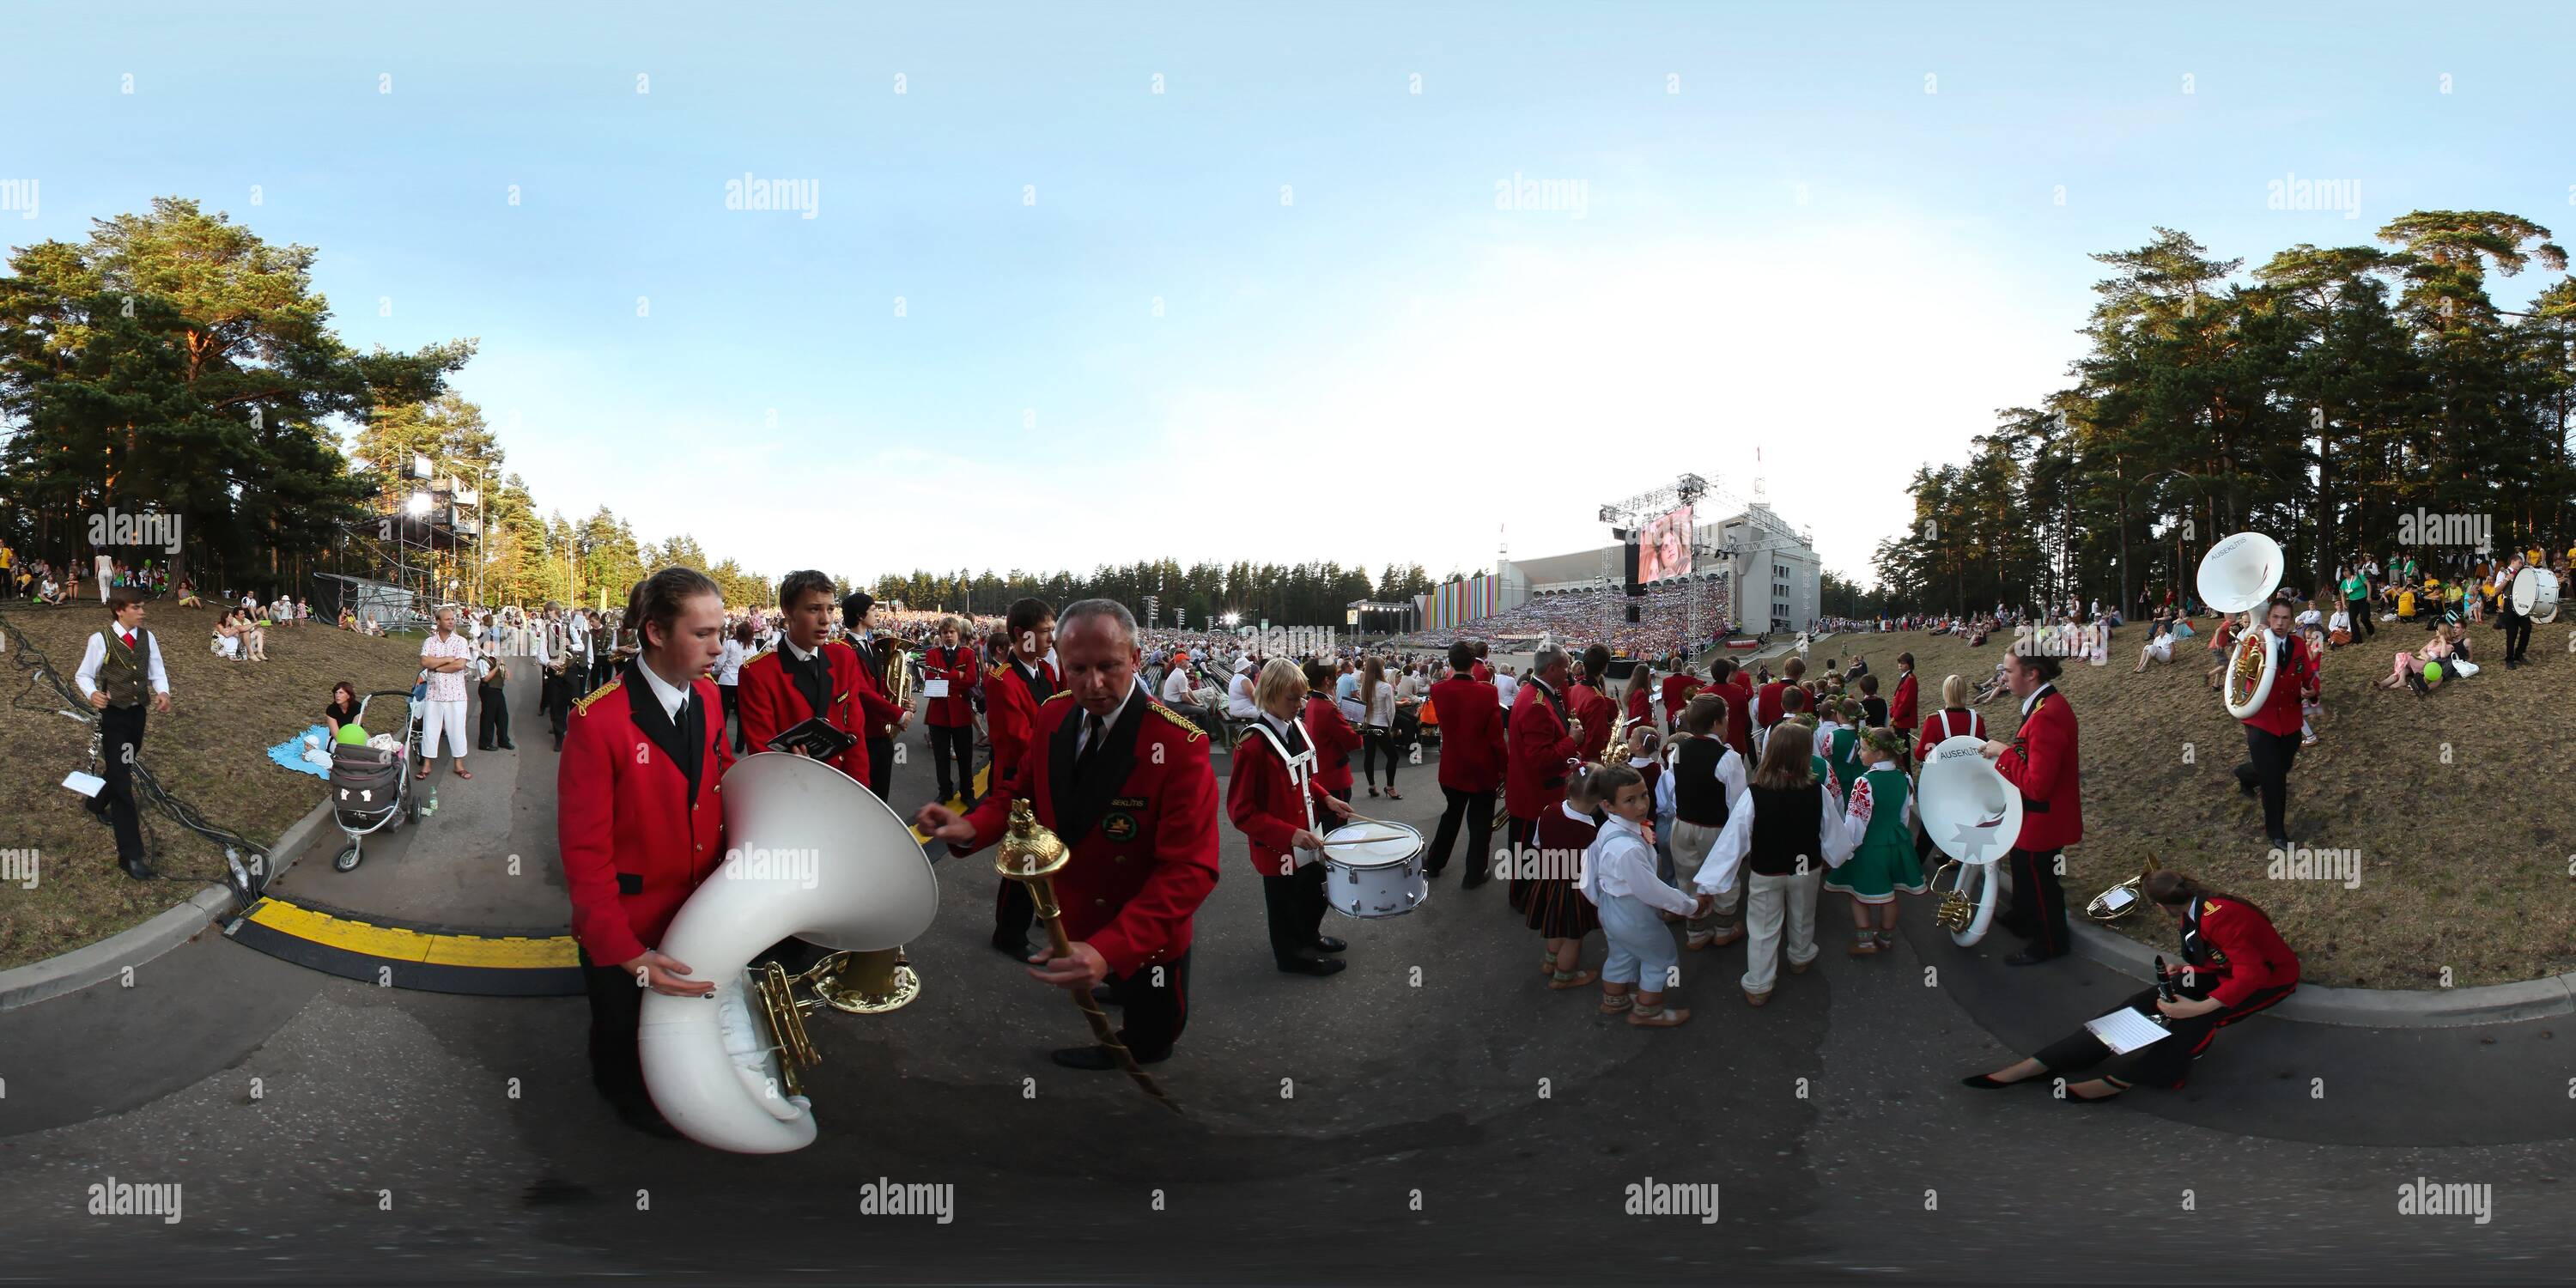 360 degree panoramic view of Last instructions before the performace